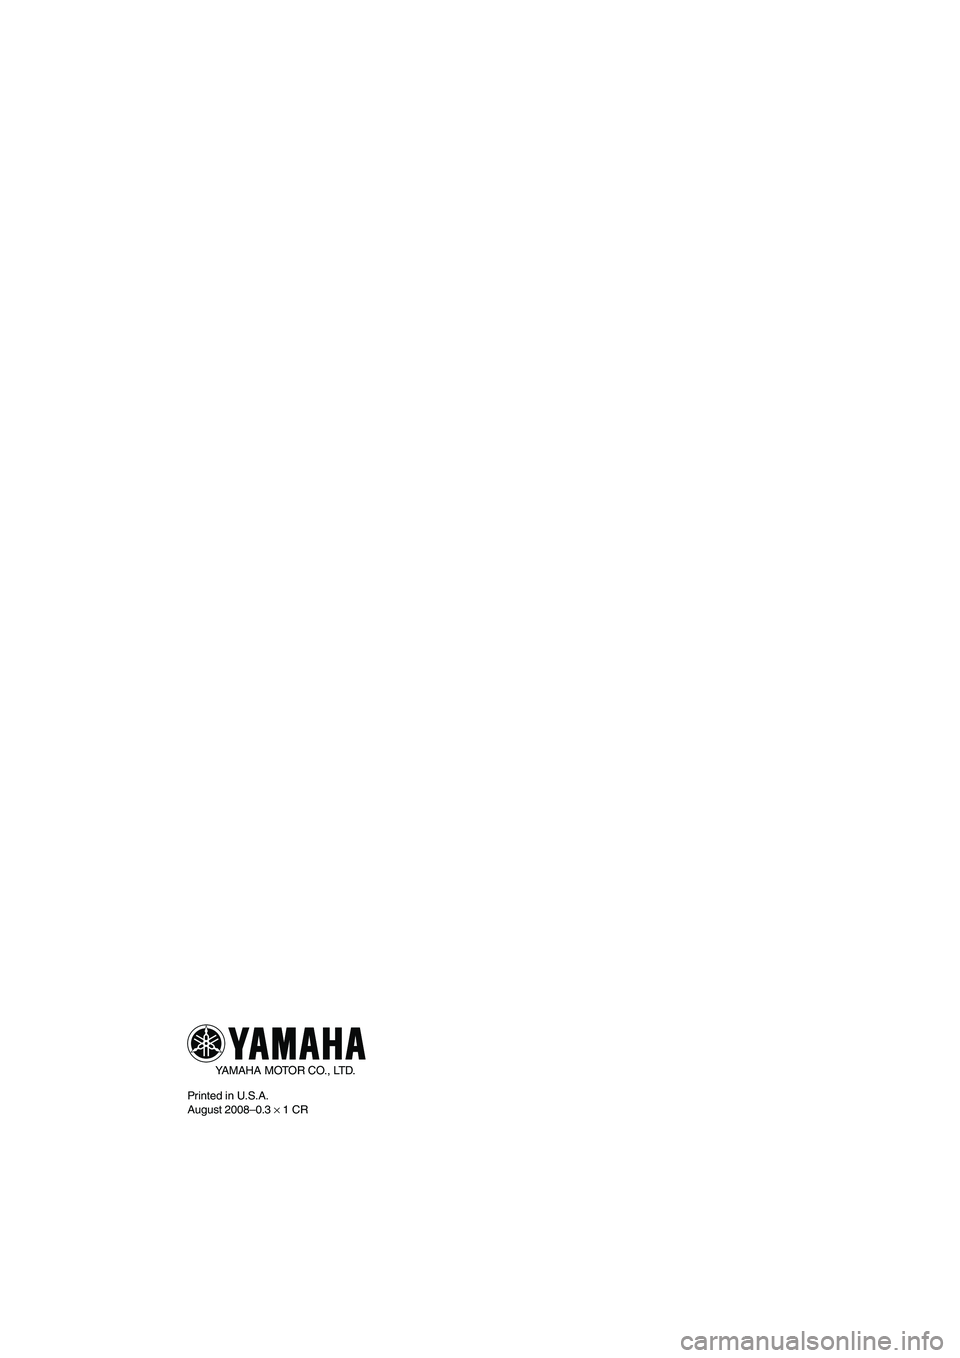 YAMAHA SVHO 2009  Owners Manual YAMAHA MOTOR CO., LTD.
Printed in U.S.A.
August 2008–0.3 × 1 CR
UF1W71E0.book  Page 1  Tuesday, June 24, 2008  11:46 AM 